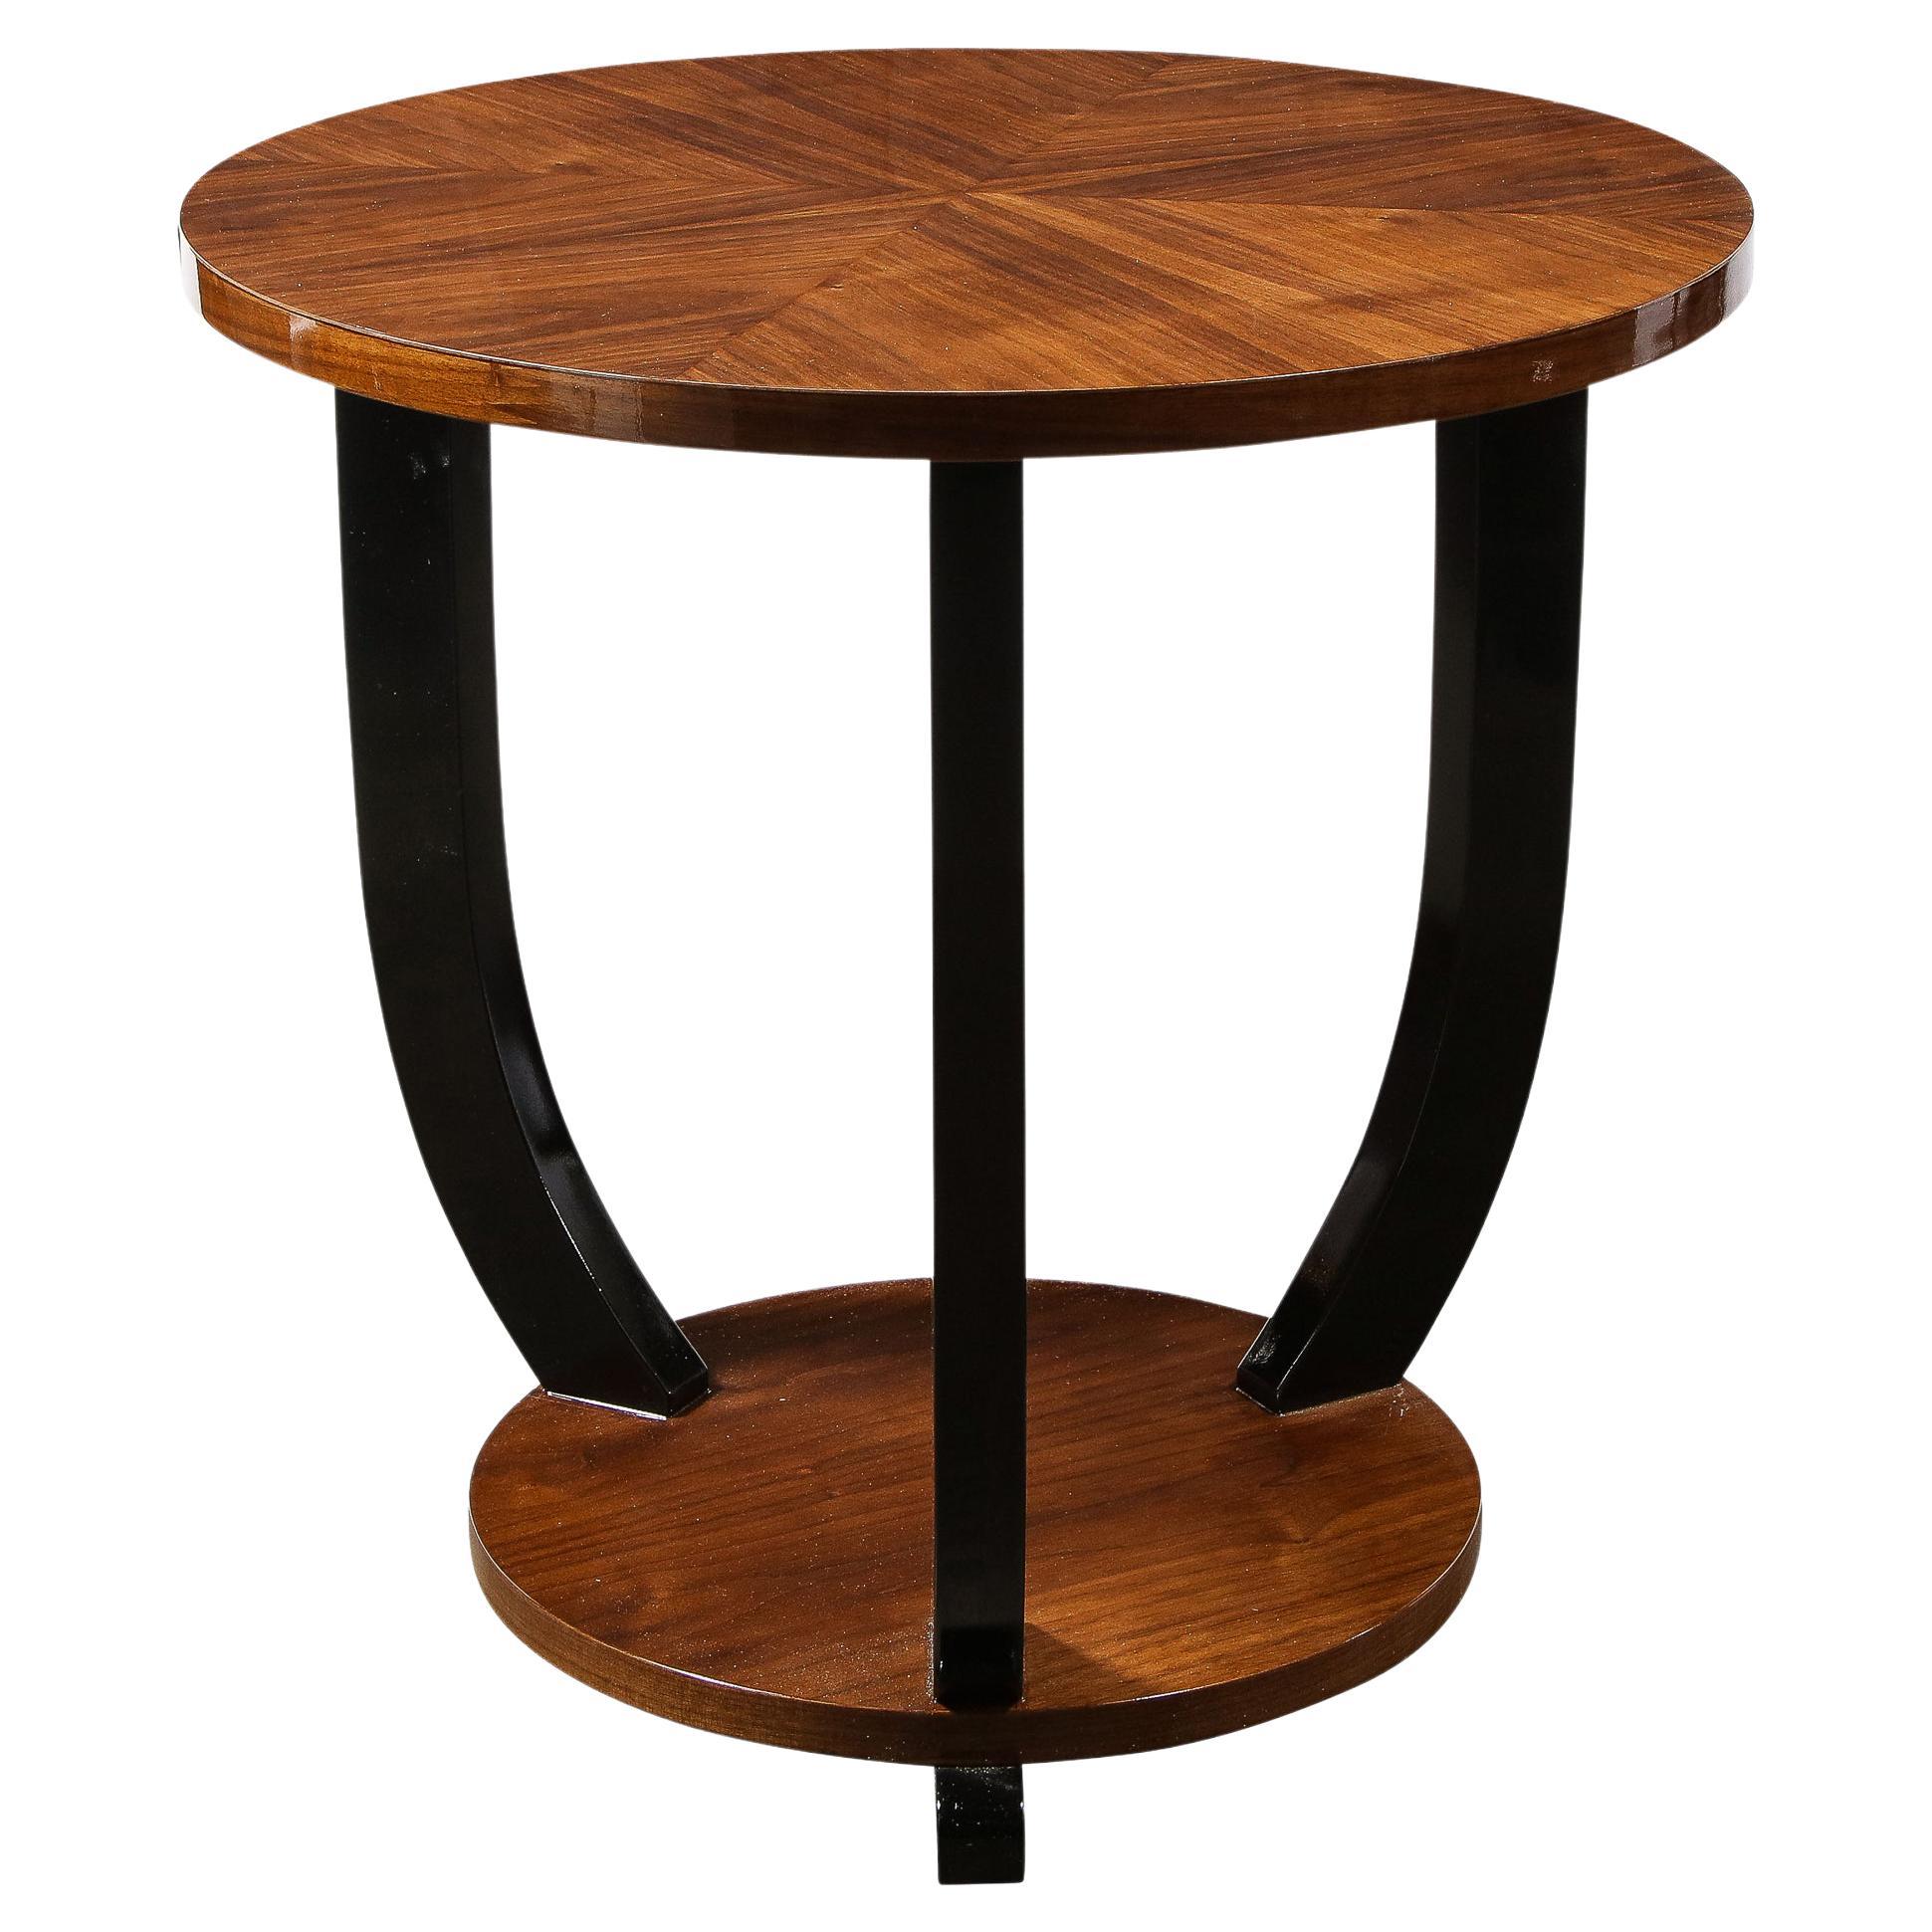 French Art Deco Two-Tiered Bookmatched Walnut & Black Lacquer Gueridon Table